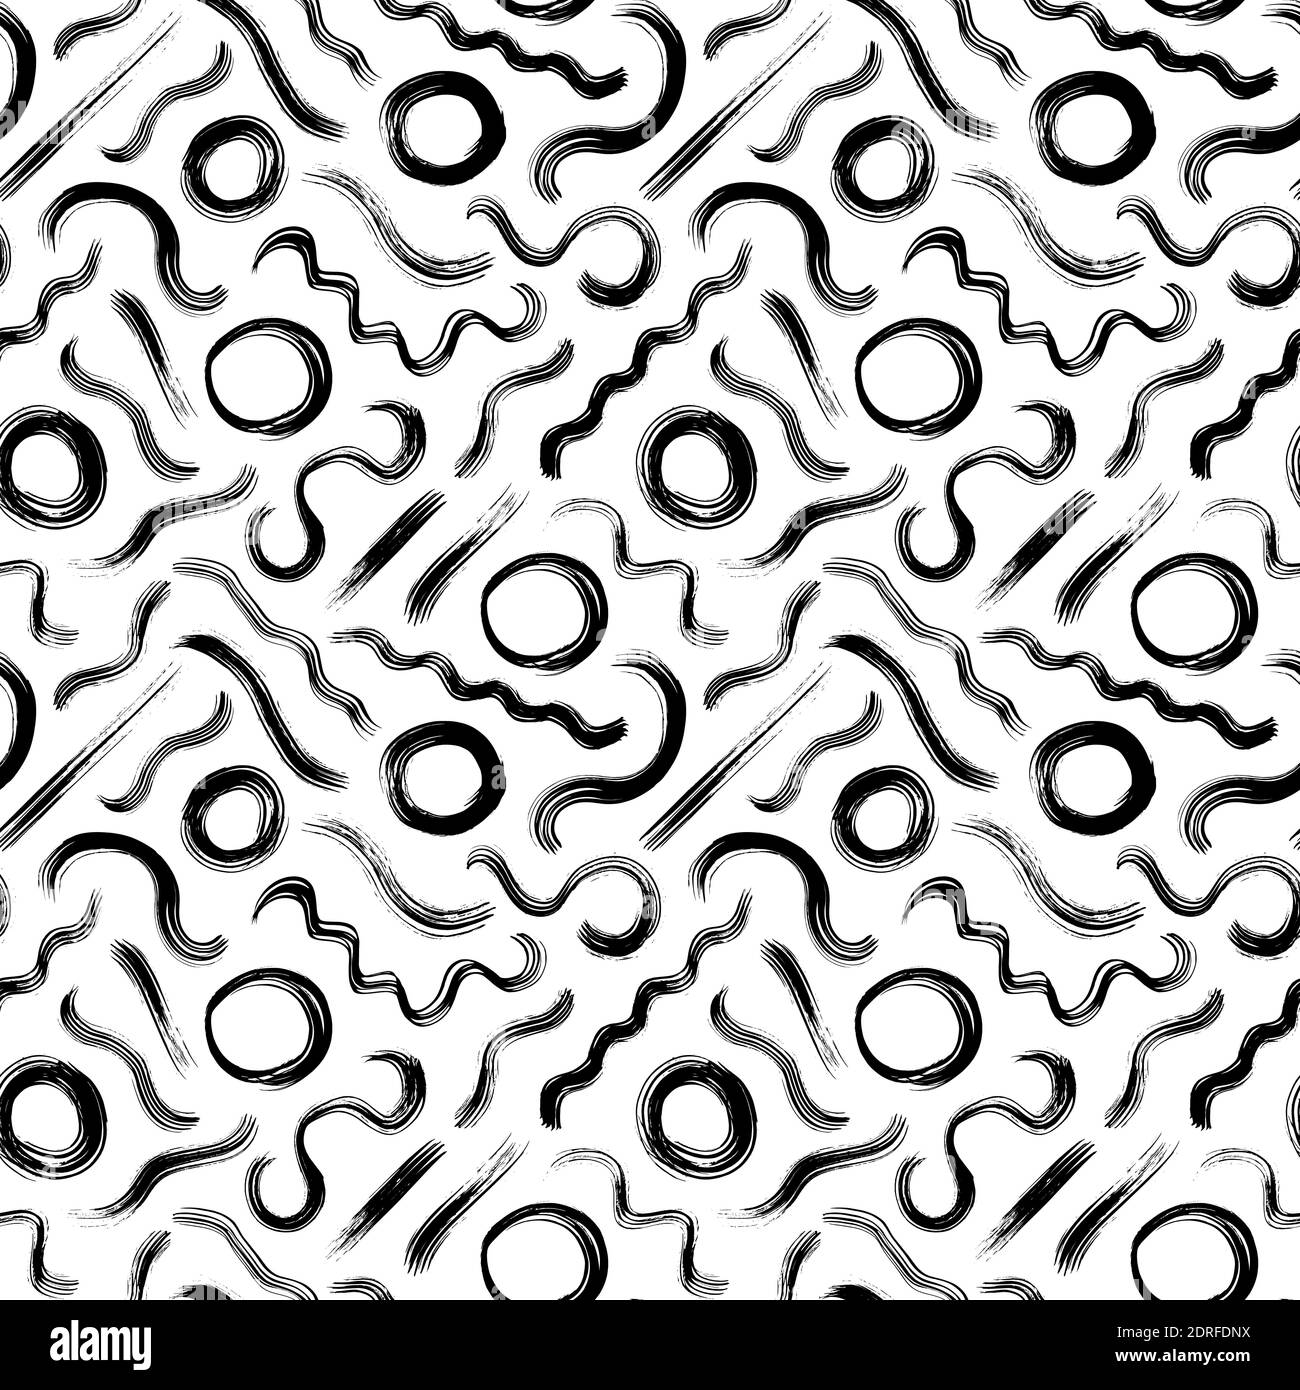 Seamless pattern with wavy lines and circles Stock Vector